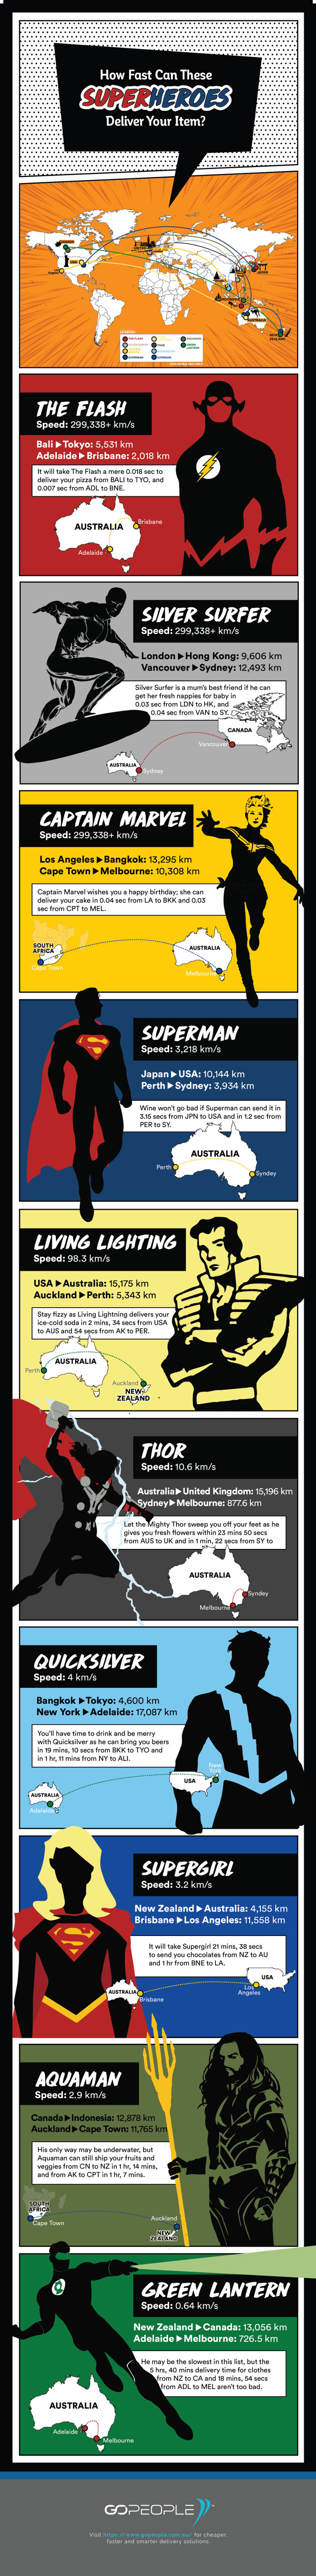 How fast can superheroes deliver your item - infographic